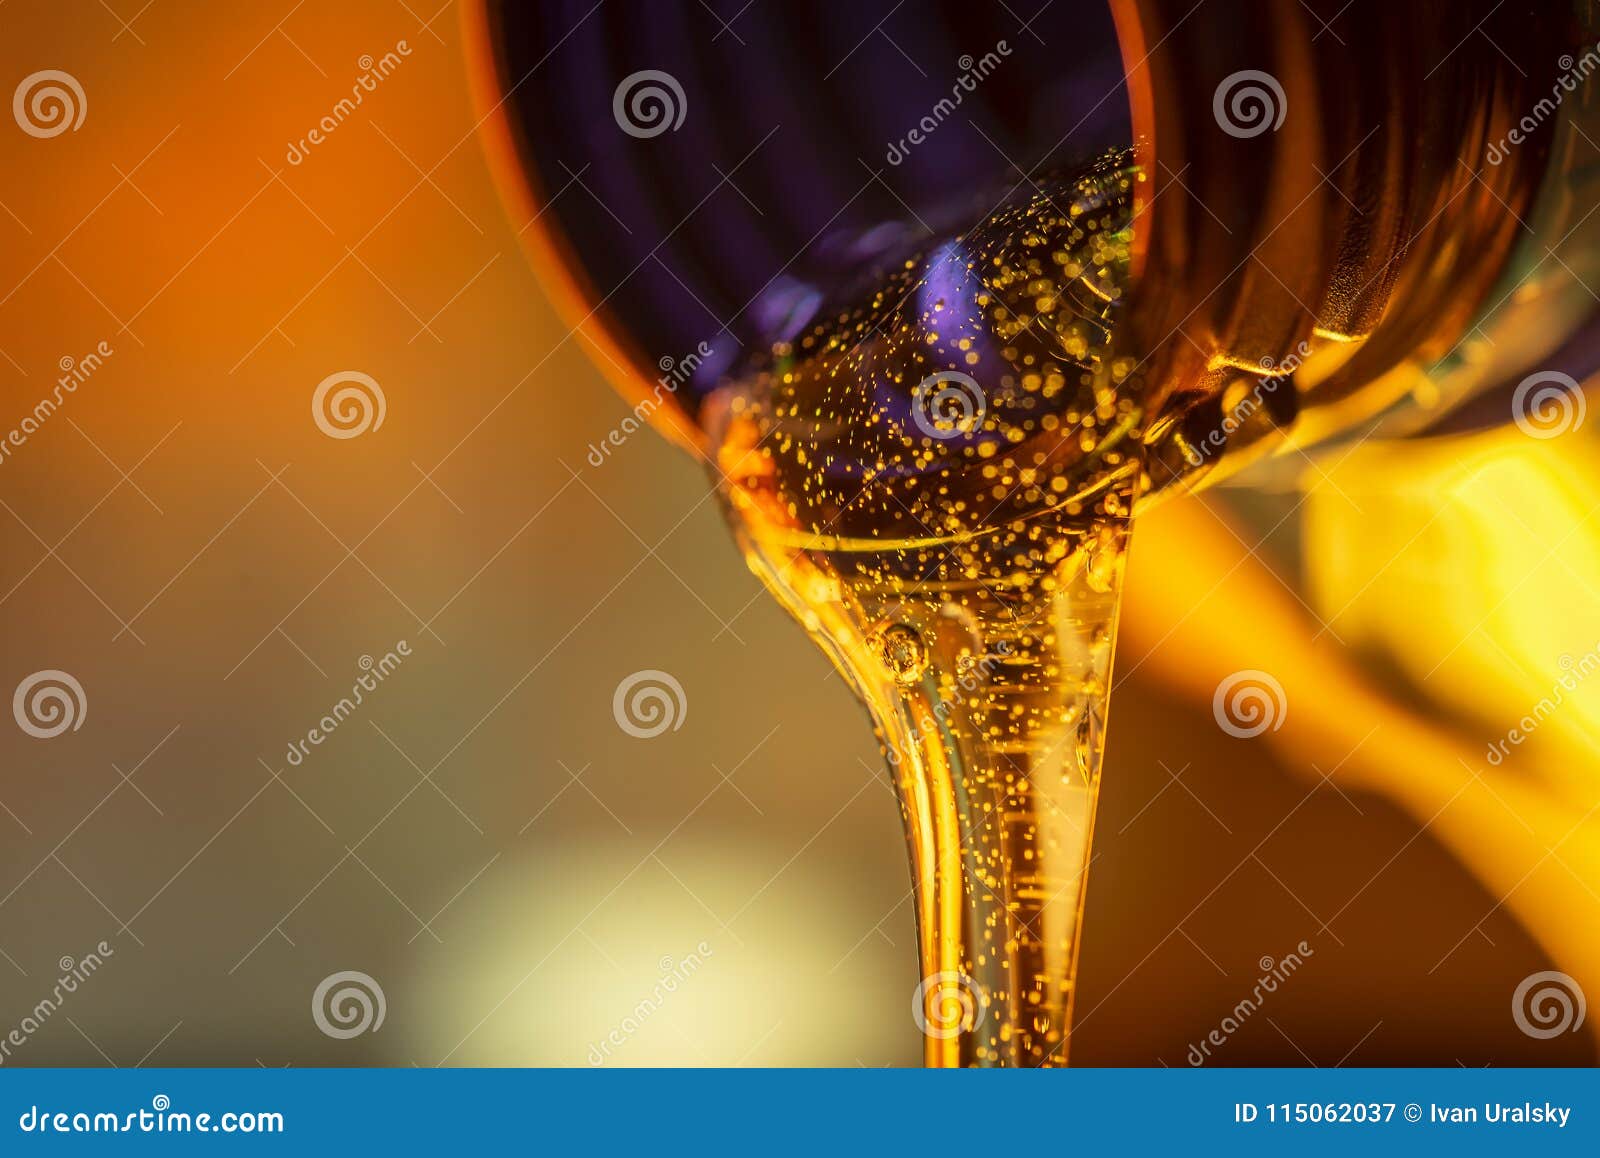 liquid stream of motorcycle motor oil flows from the neck of the bottle close-up.